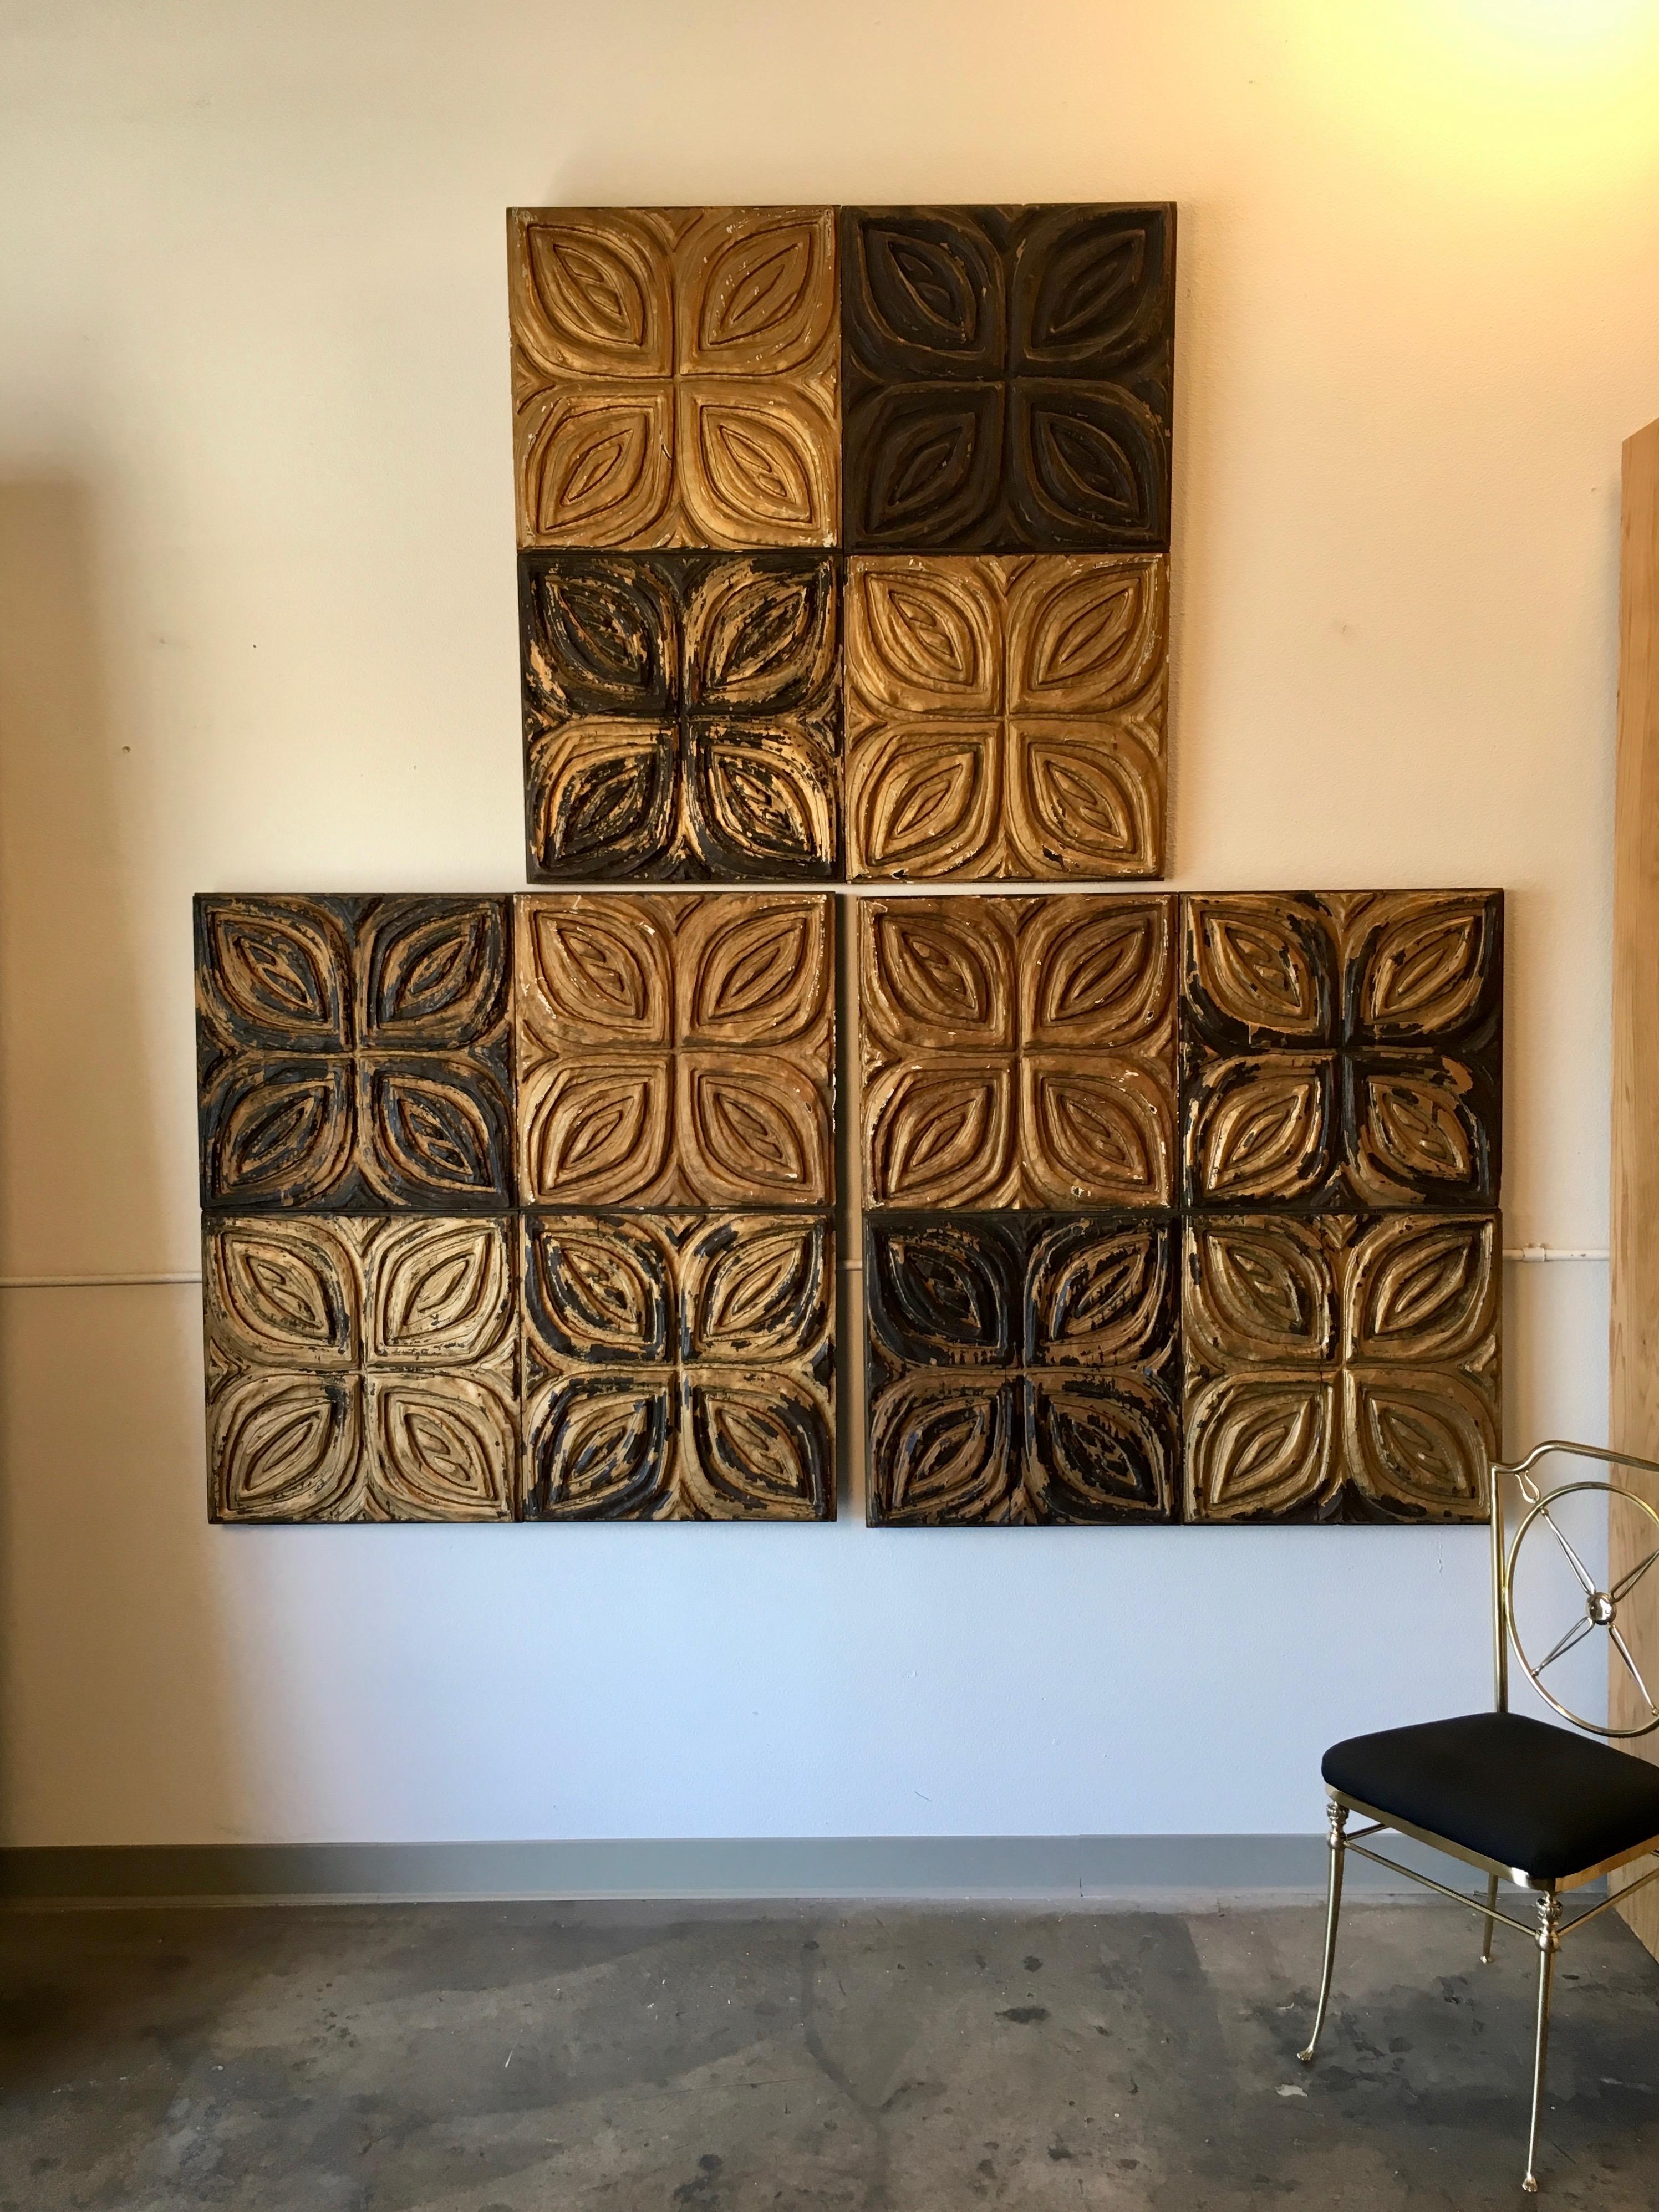 North American Carved Redwood Wall Panels by Panelcarve